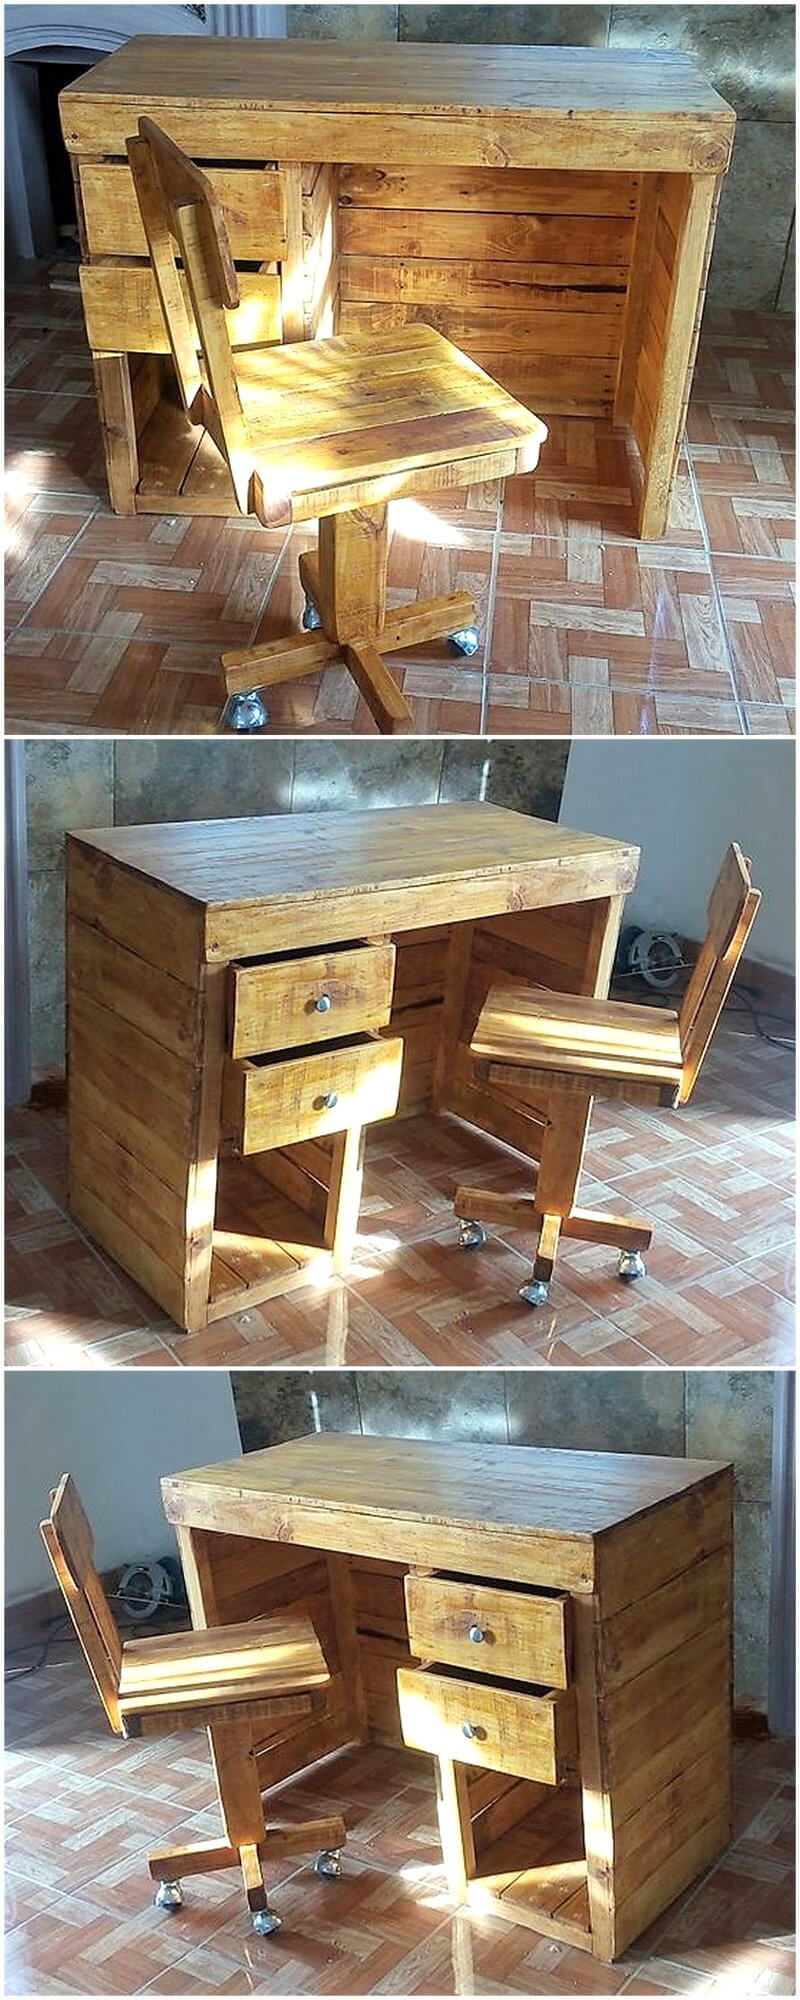 pallet desk and chair